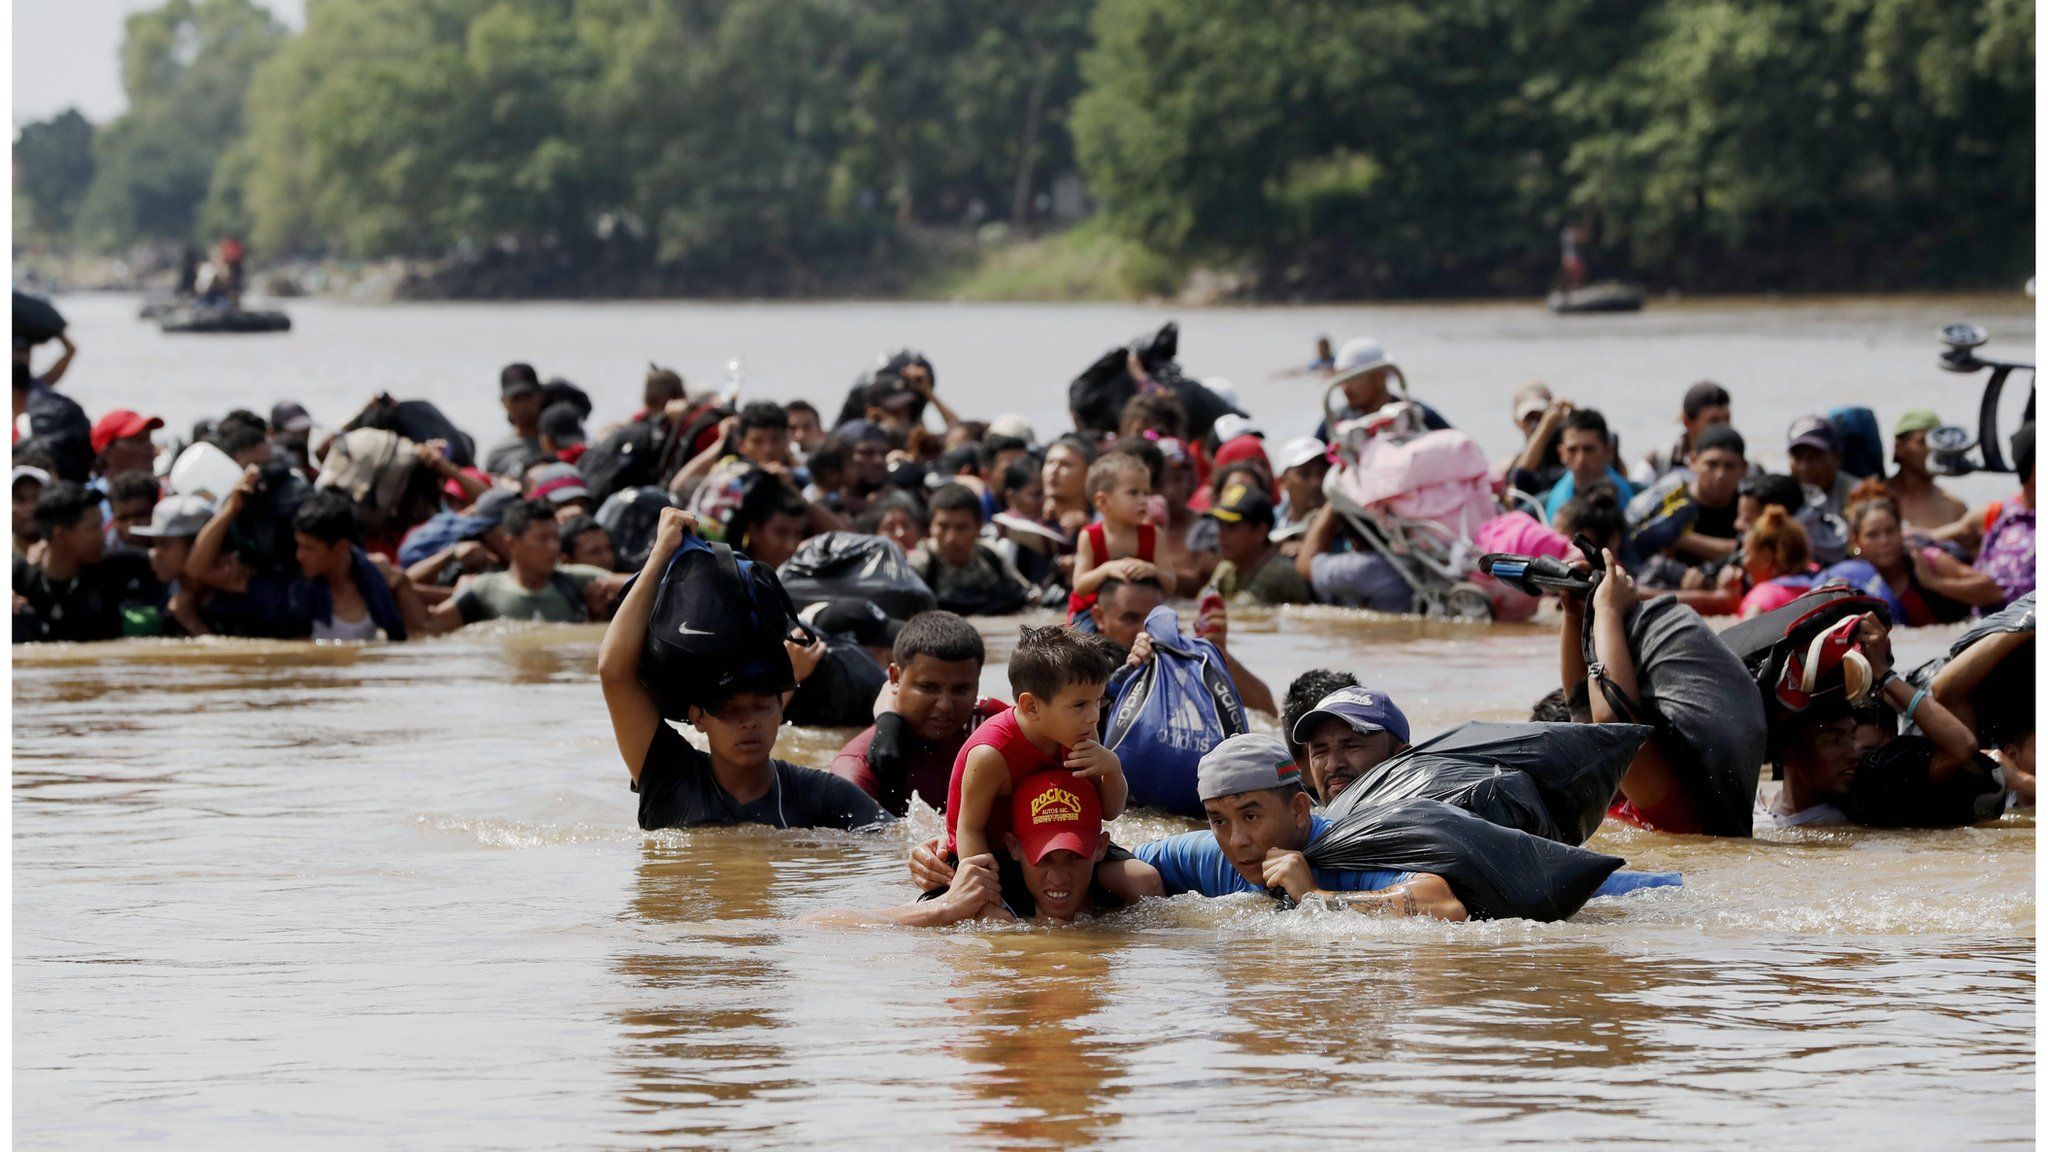 Migrants, mostly Hondurans, cross the Suchiate river, which separates Guatemala and Mexico, on 29 October 2018